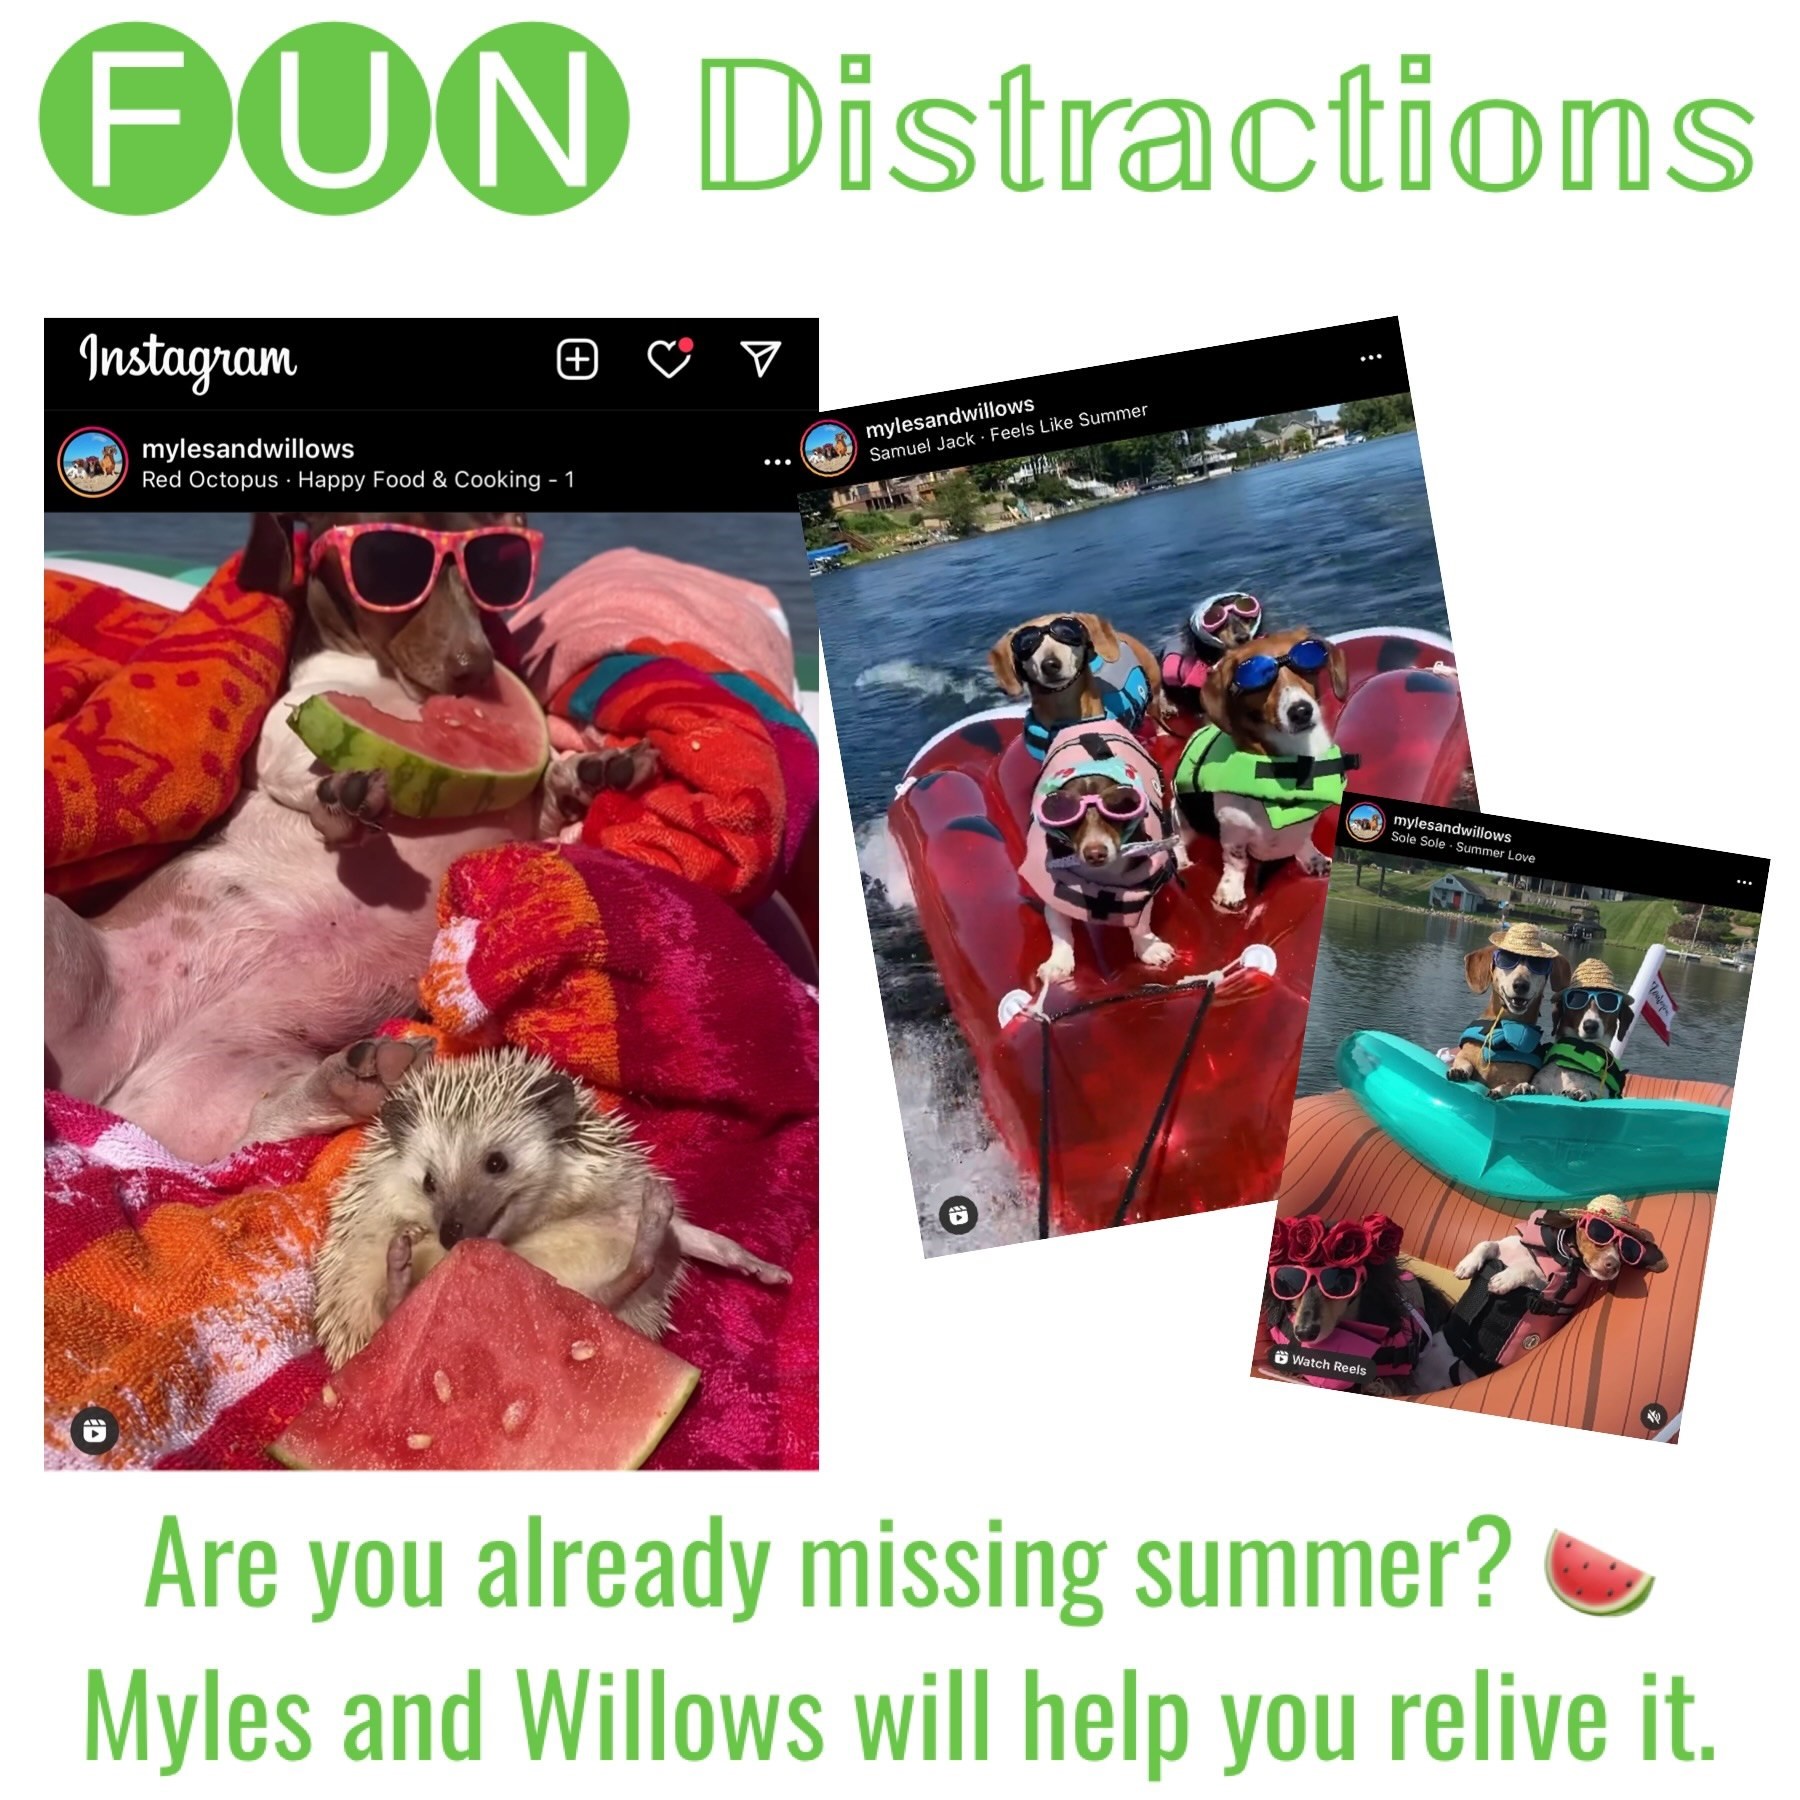 Image advertising the Library’s FUN Distractions series post on @mylesnandwillows